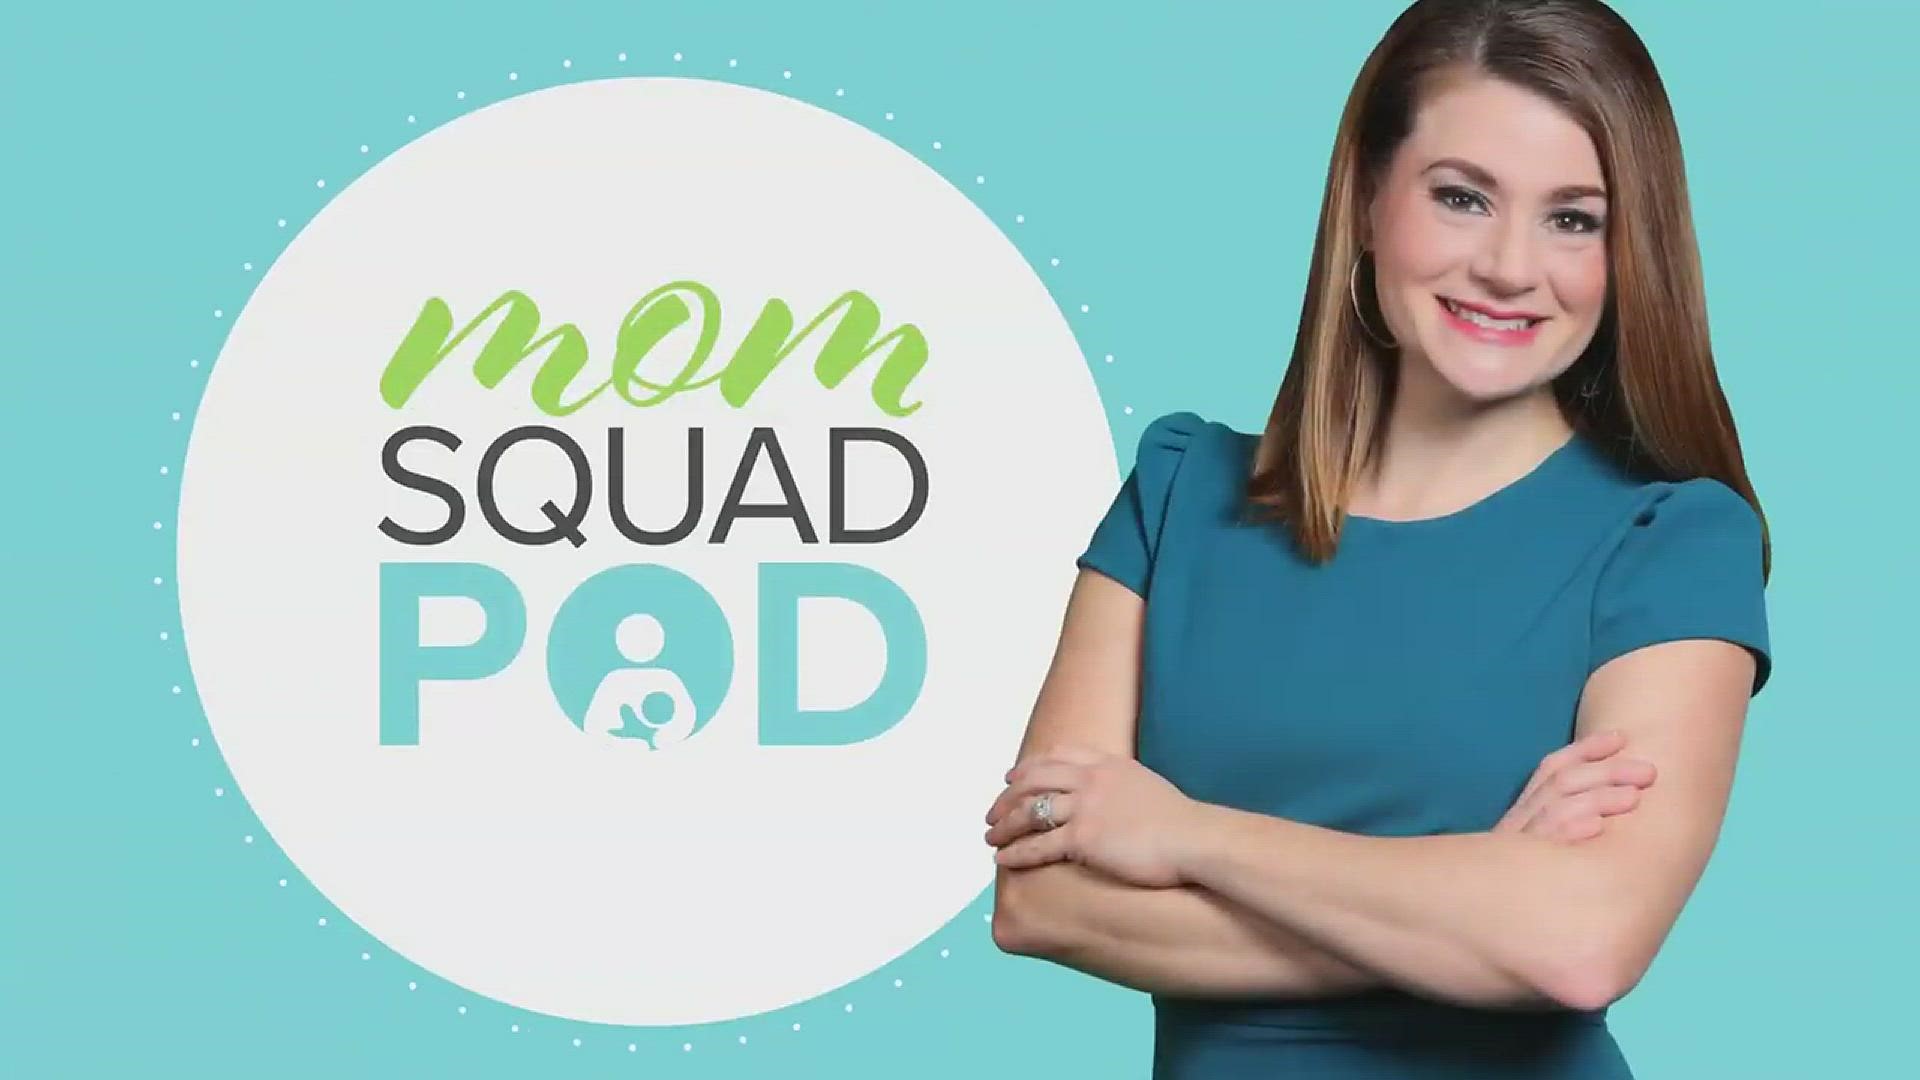 School is out for summer, which means outdoor activities are really ramping up. That's why this edition of Mom Squad focuses on summer safety parents should know.